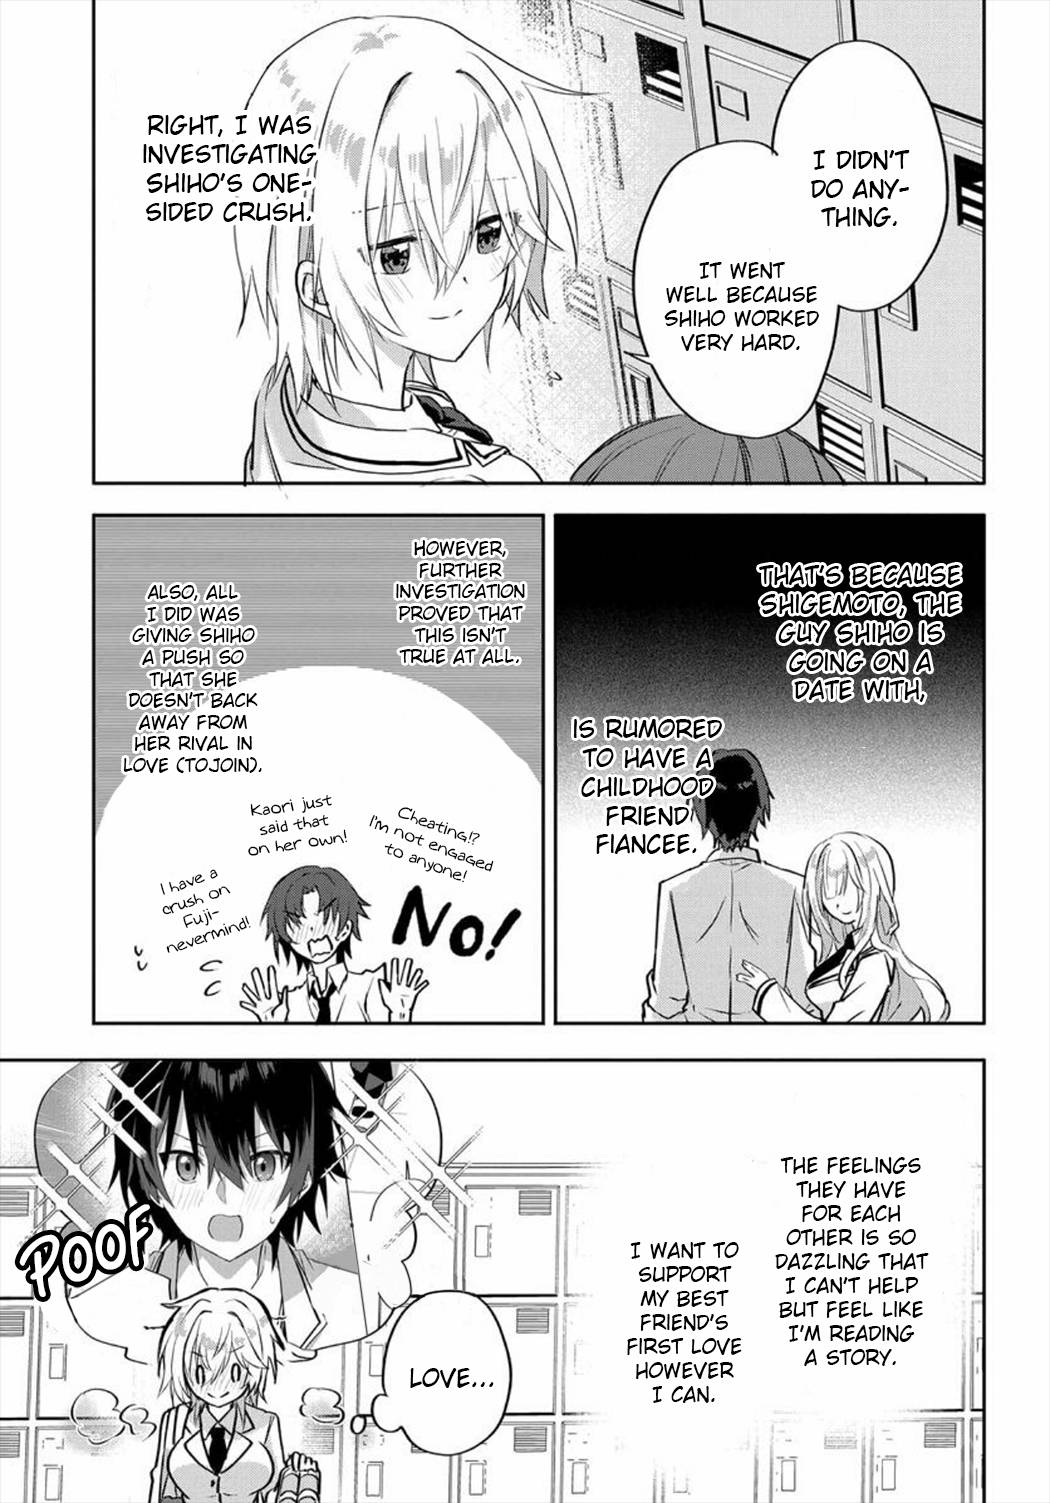 Since I’Ve Entered The World Of Romantic Comedy Manga, I’Ll Do My Best To Make The Losing Heroine Happy - chapter 2.1 - #5